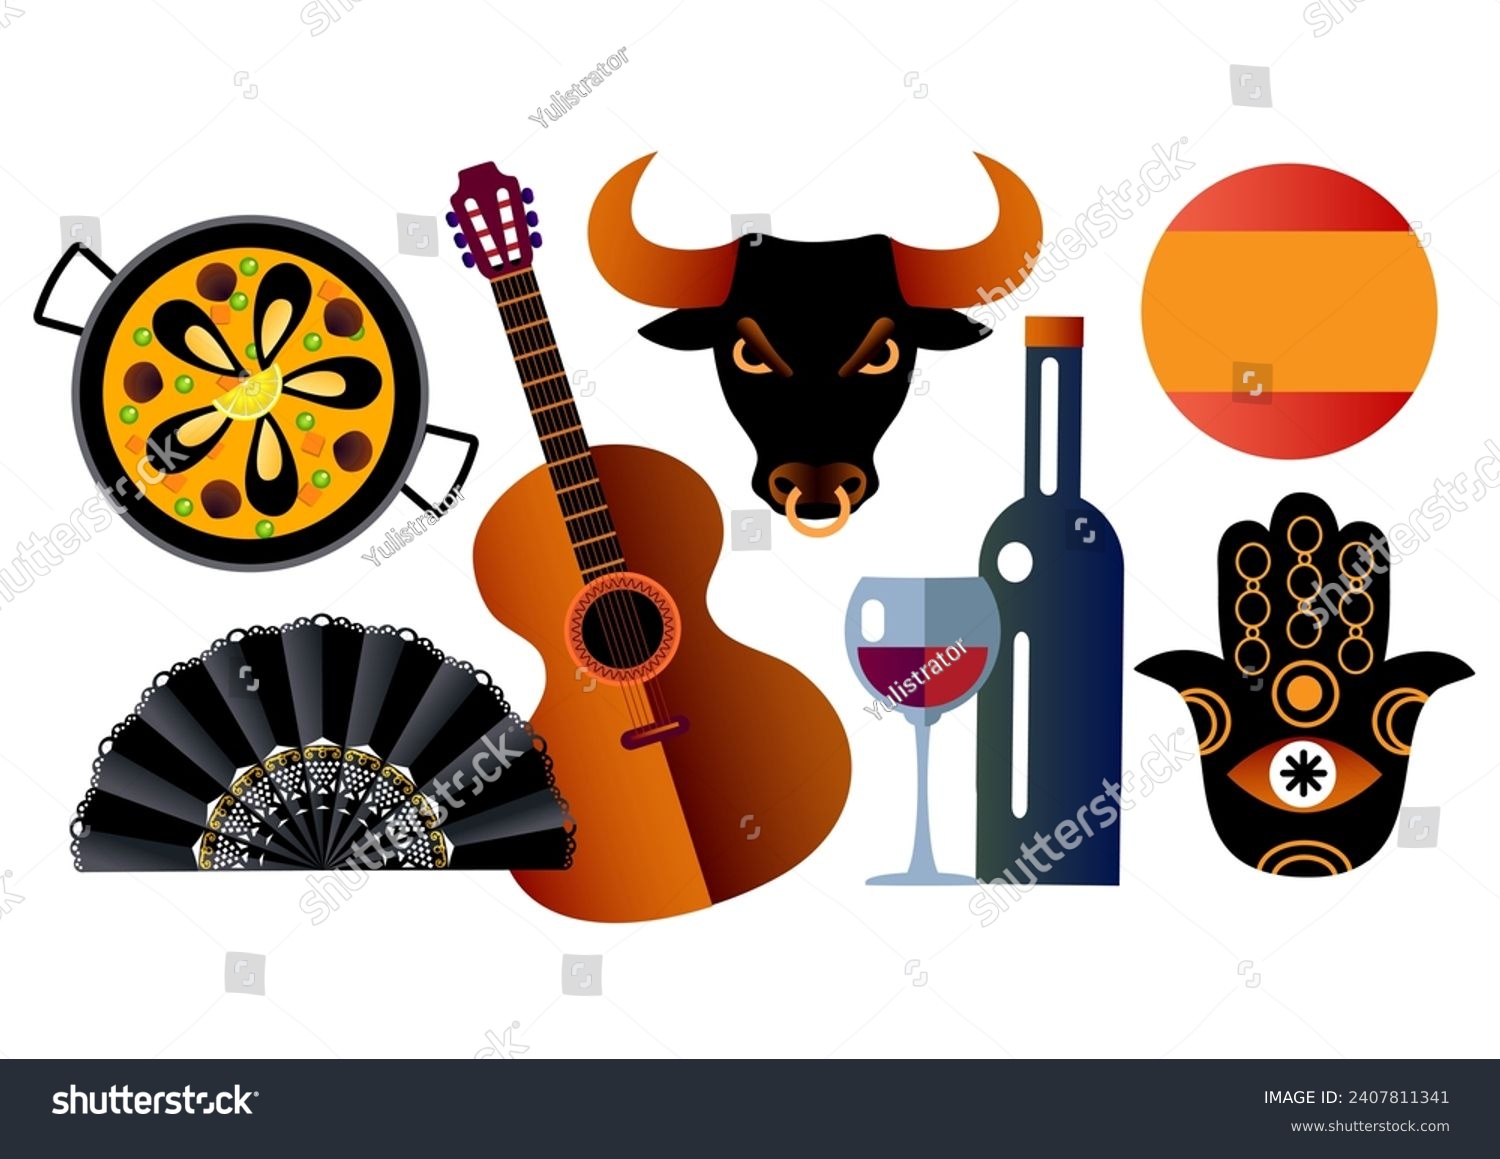 SVG of andalusian culture signs and icons, flamenco, corrida svg